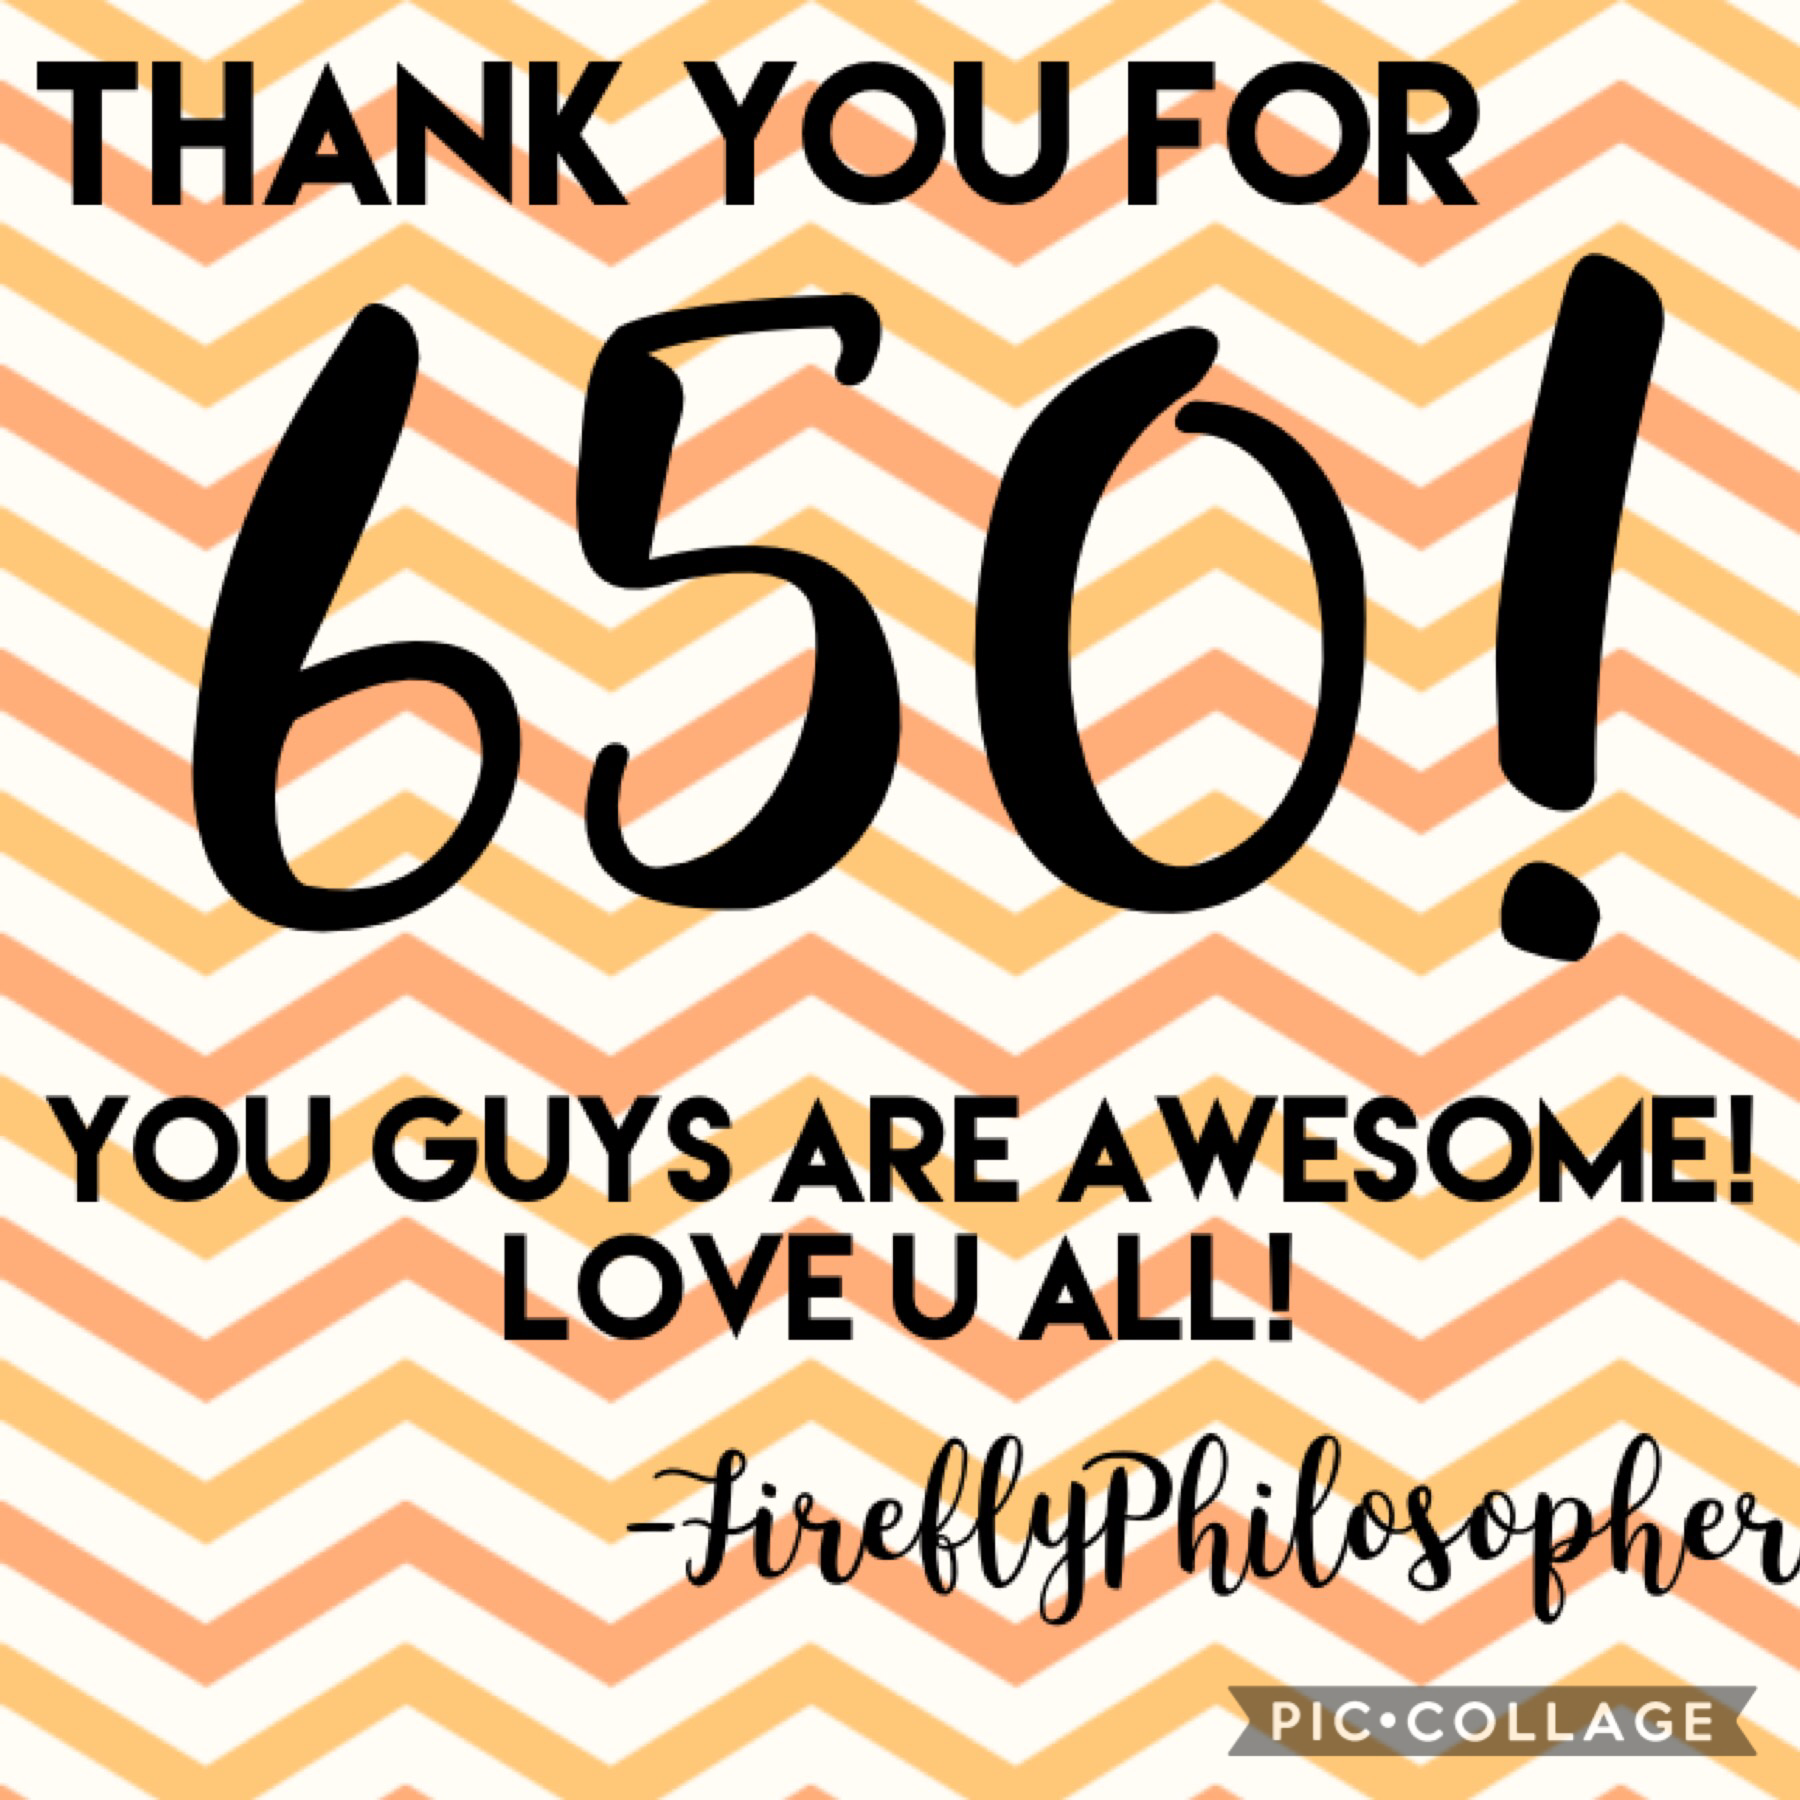 Thanks so much! You all are amazing.